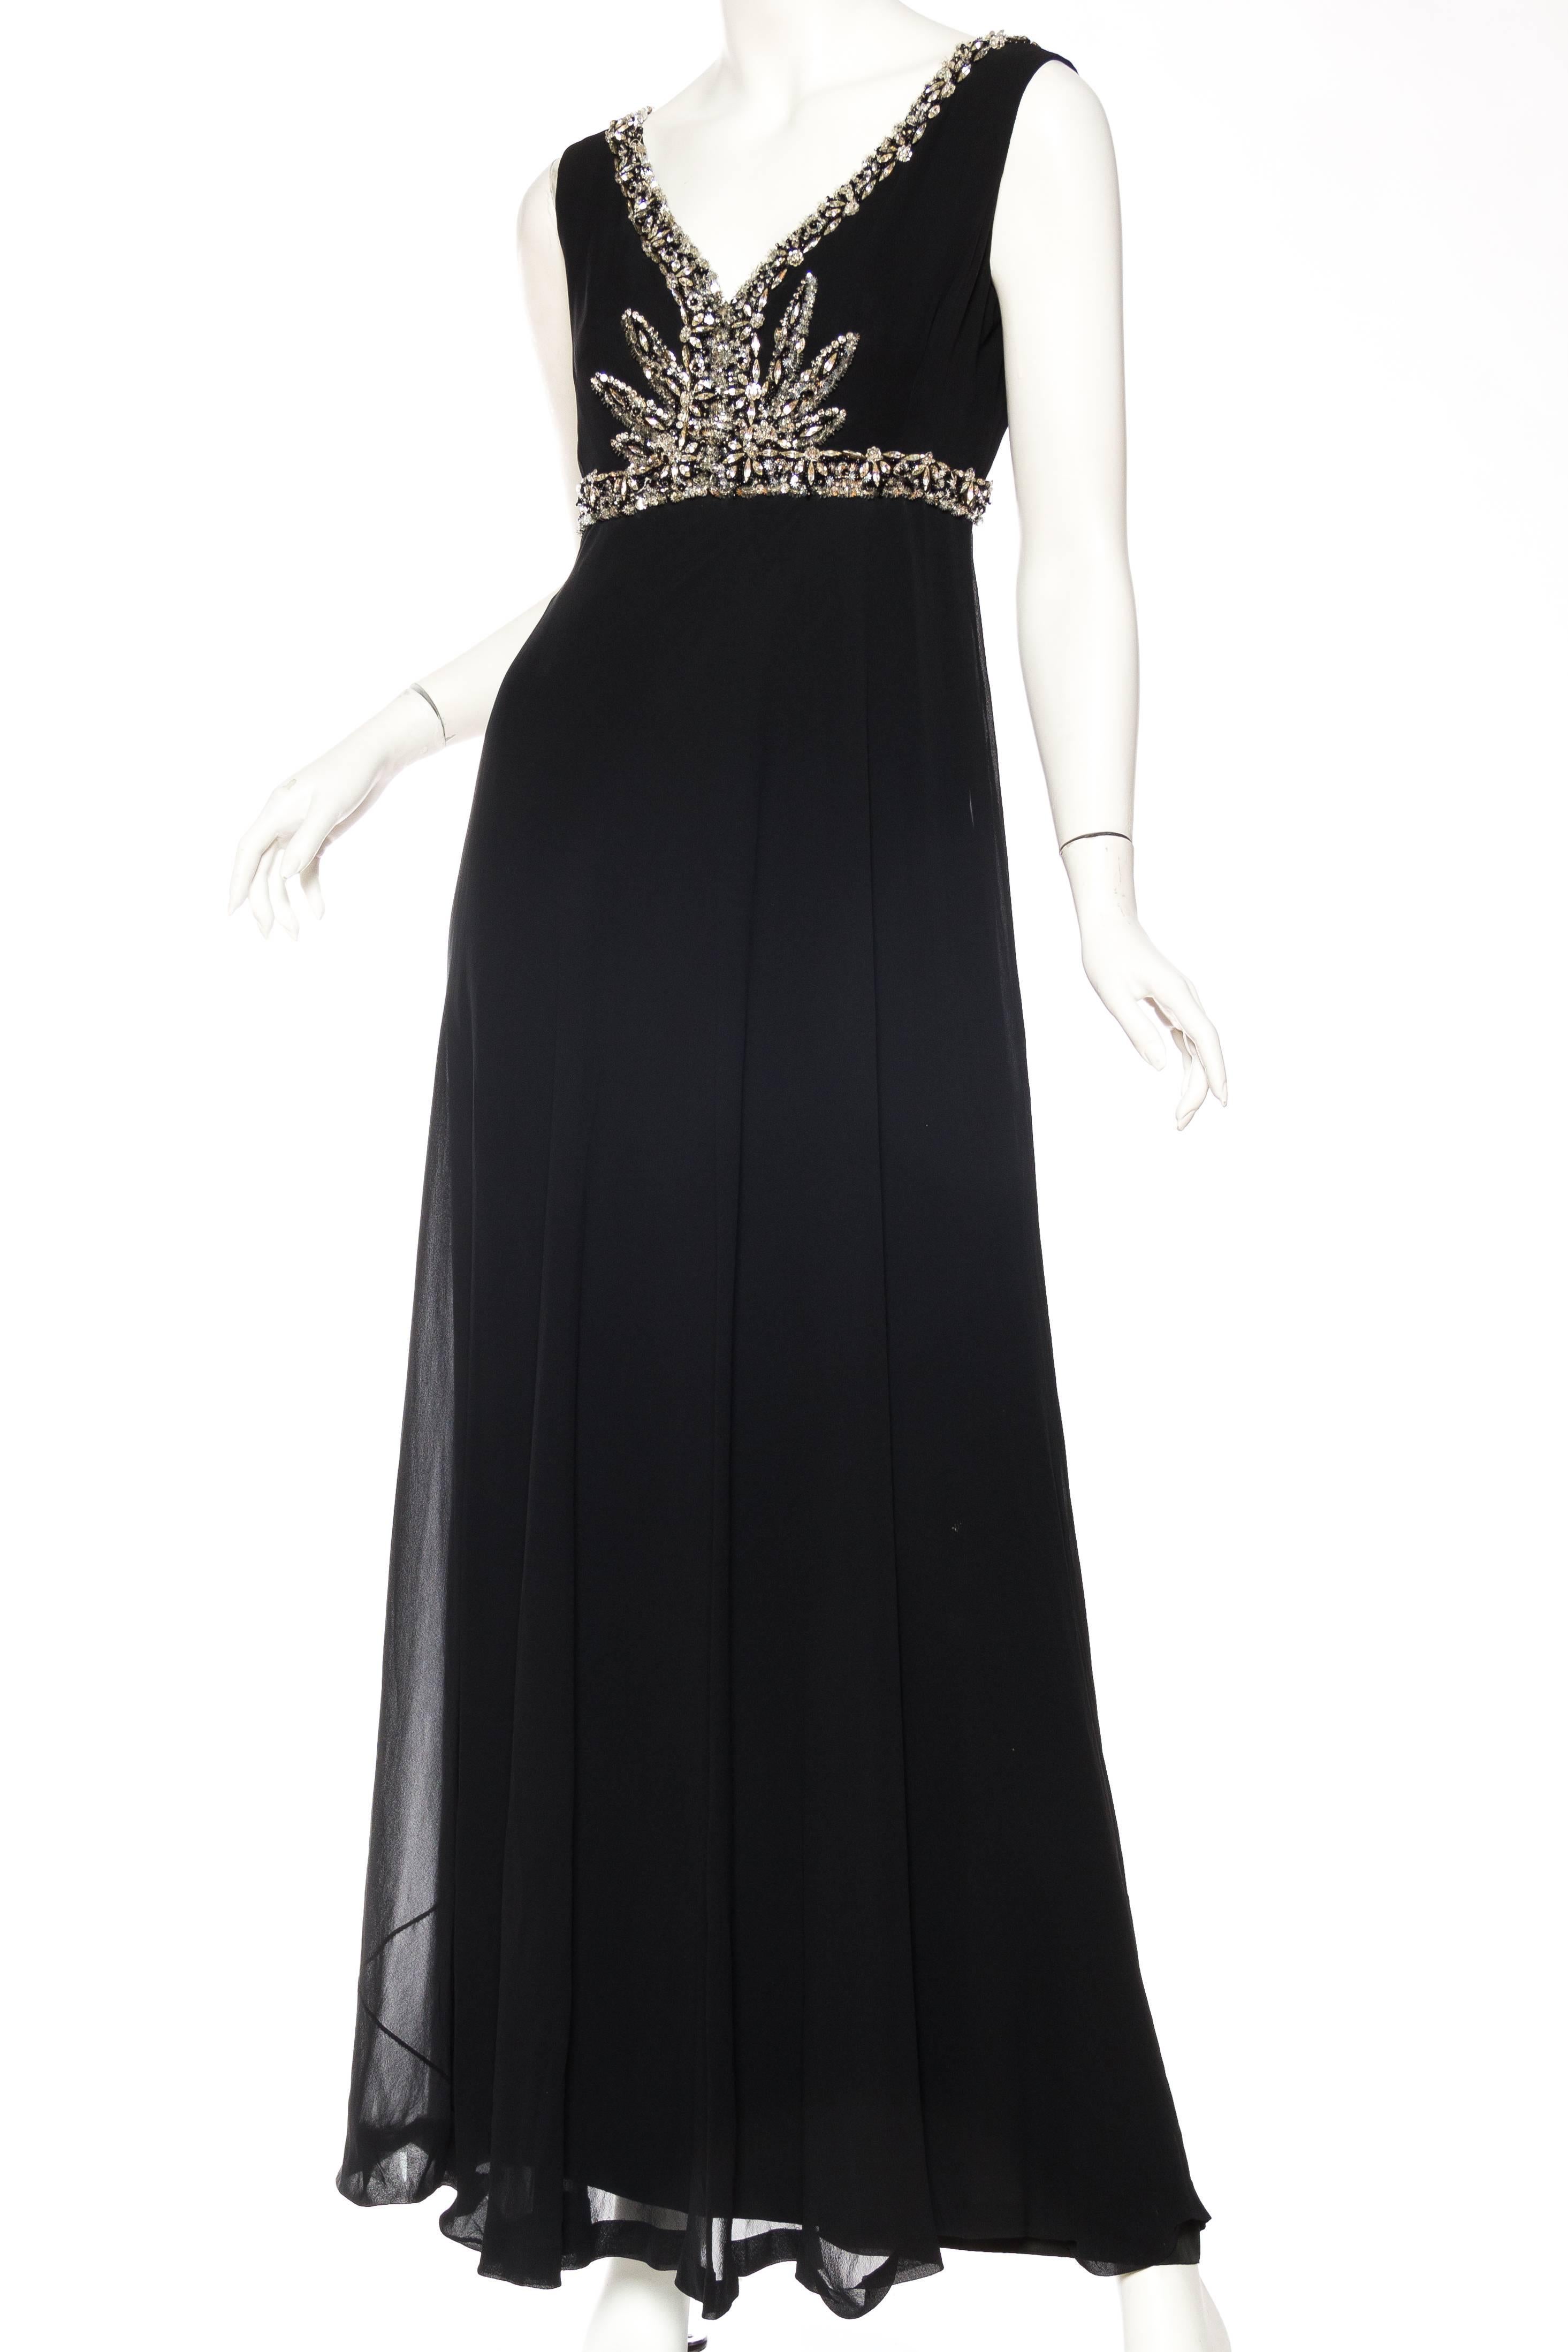 1970S RETY OF PARIS Black Haute Couture Silk Chiffon Crystal Beaded Empire Wais In Excellent Condition For Sale In New York, NY